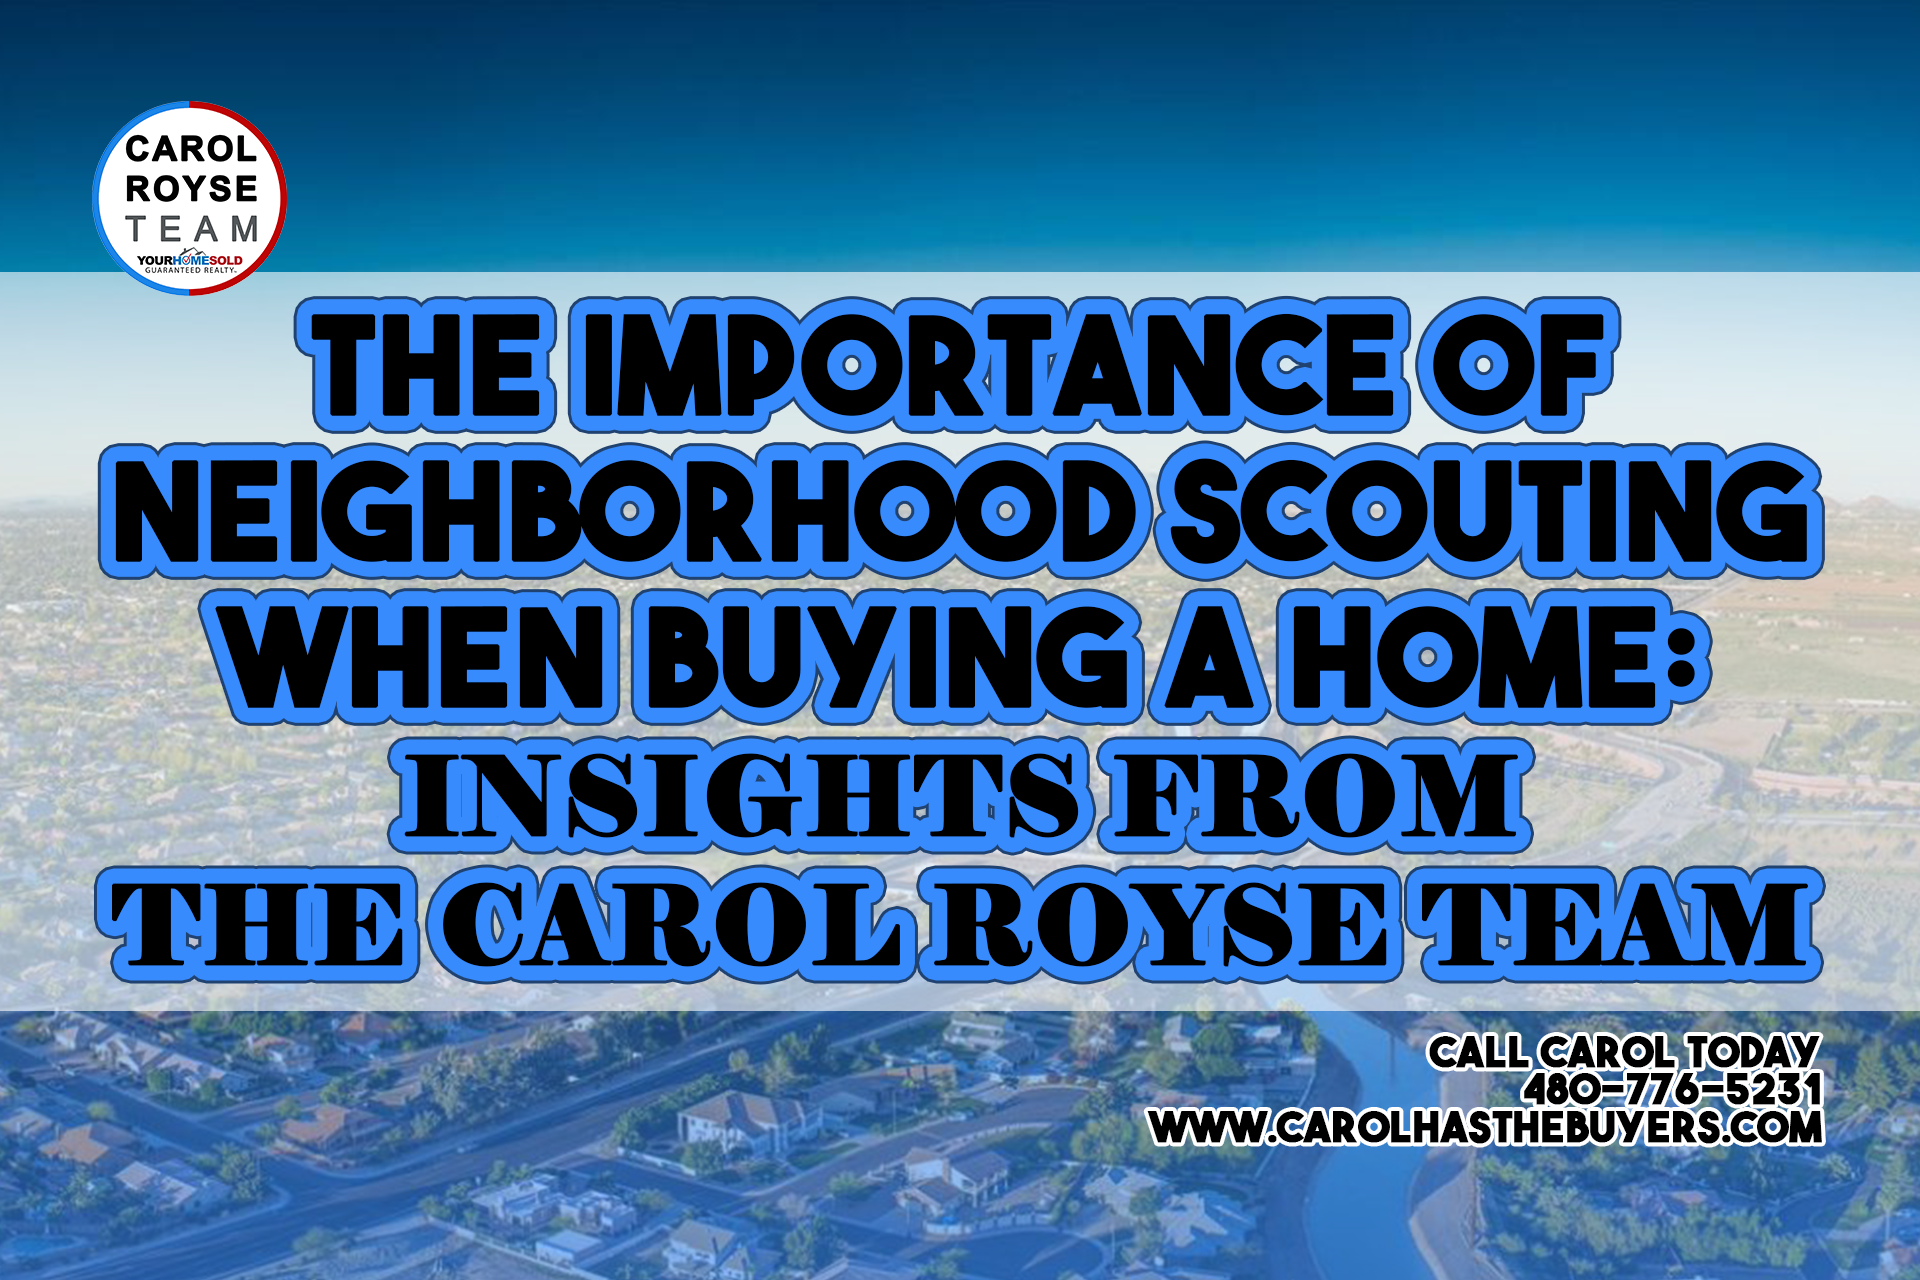 The Importance of Neighborhood Scouting When Buying a Home: Insights from The Carol Royse Team